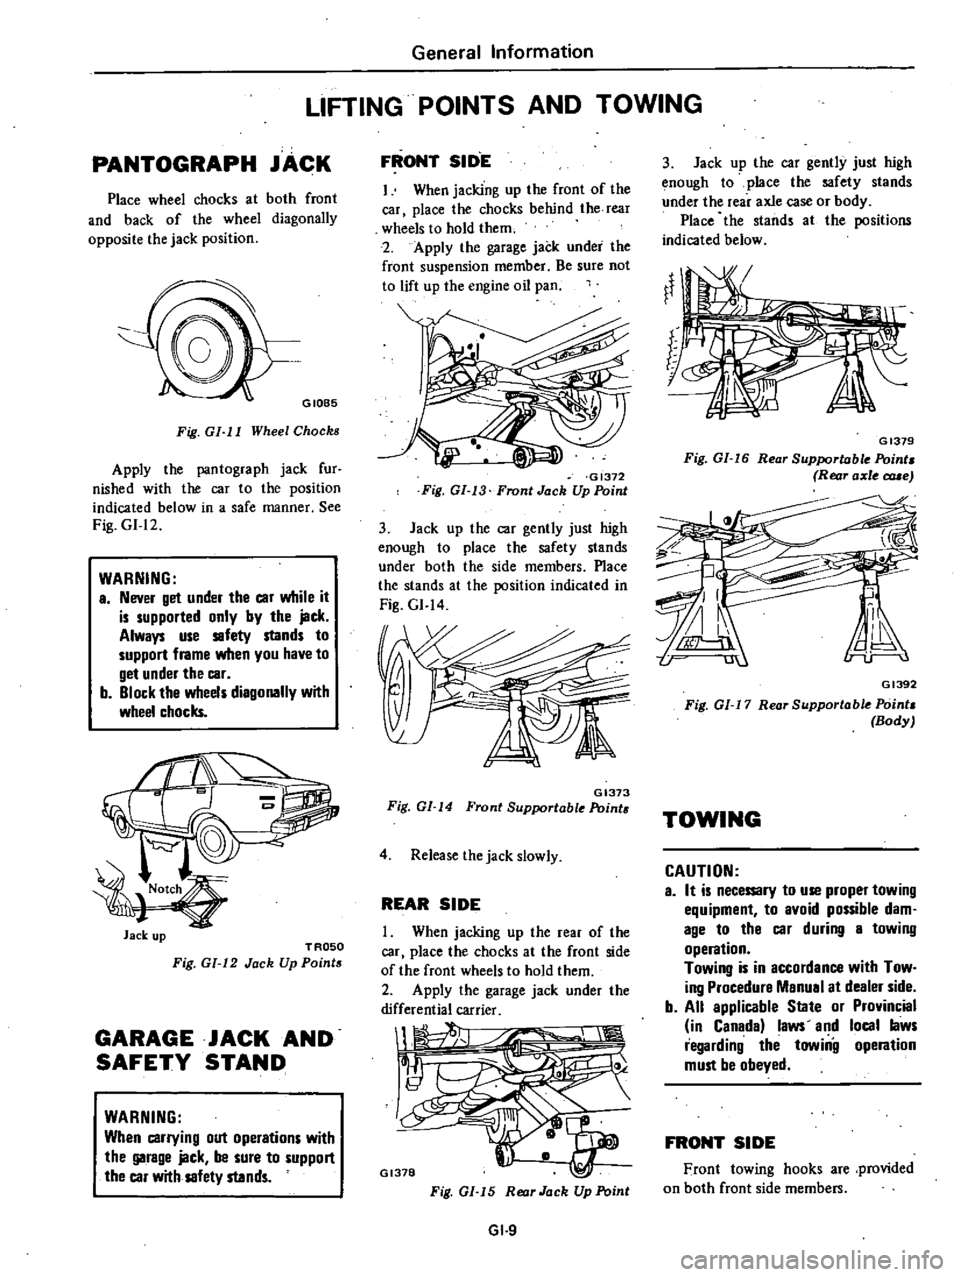 DATSUN 210 1979  Service Manual 
General 
Information

LIFTING 
POINTS 
AND 
TOWING

PANTOGRAPH 
JACK

Place 
wheel 
chocks 
at 
both 
front

and

back 
of 
the 
wheel

diagonally

opposite 
the

jack 
position

GIOB5

Fig 
GI 
I 
I